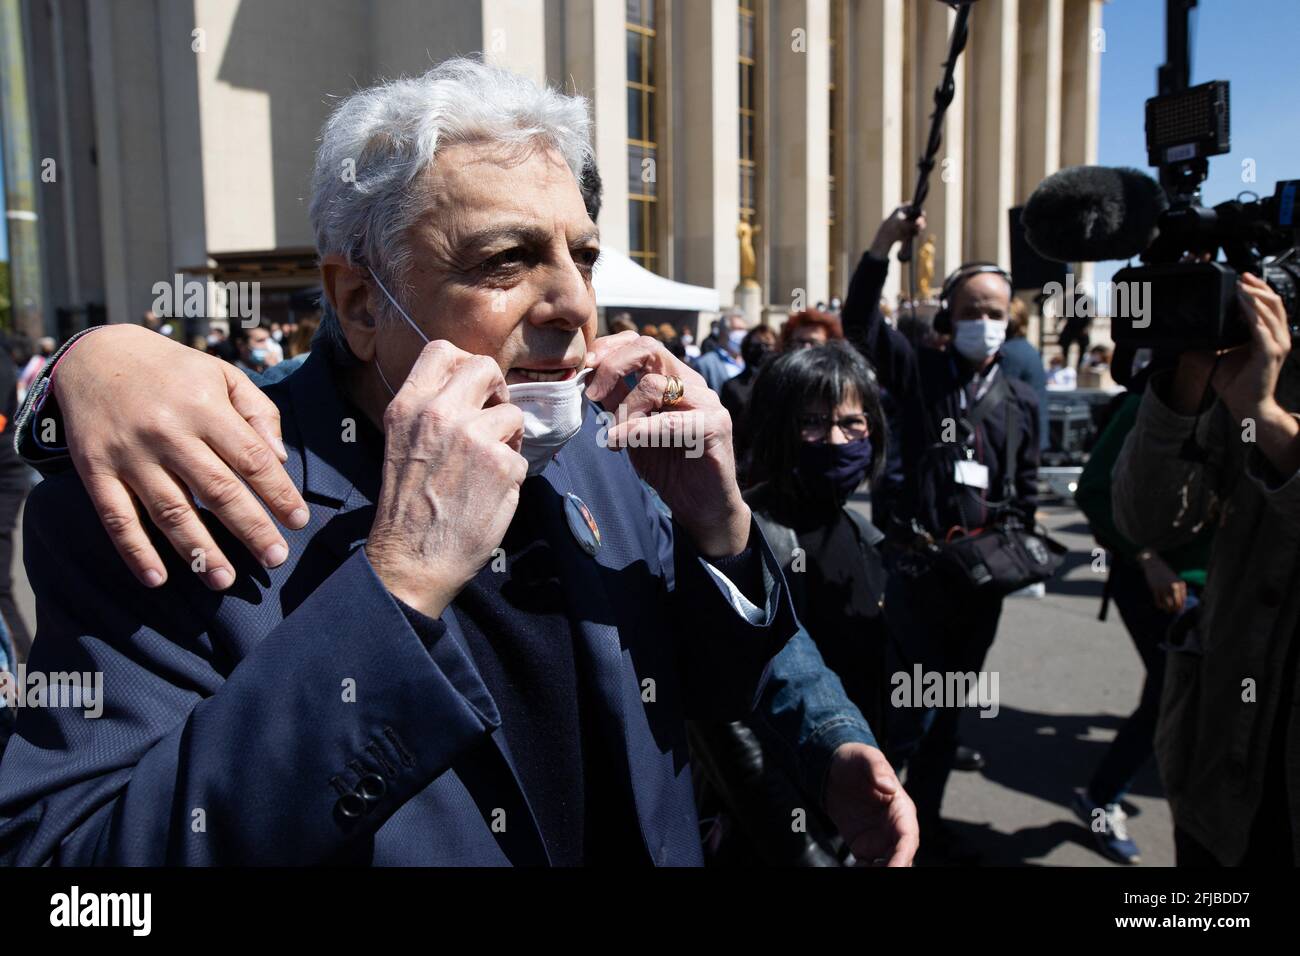 French singer Gaston Ghrenassia aka Enrico Macias (C) arrives as people gather to ask justice for late Sarah Halimi on Trocadero plaza in Paris on April 25, 2021. Halimi, a 65-year-old Orthodox Jewish woman, died in 2017 after being pushed out of the window of her Paris flat by neighbour Traore, 27, who shouted "Allahu Akbar" ("God is great" in Arabic). Traore, a heavy cannabis smoker, has been in psychiatric care since Halimi's death and he remains there after the ruling. Photo by Raphael Lafargue/ABACAPRESS.COM Stock Photo